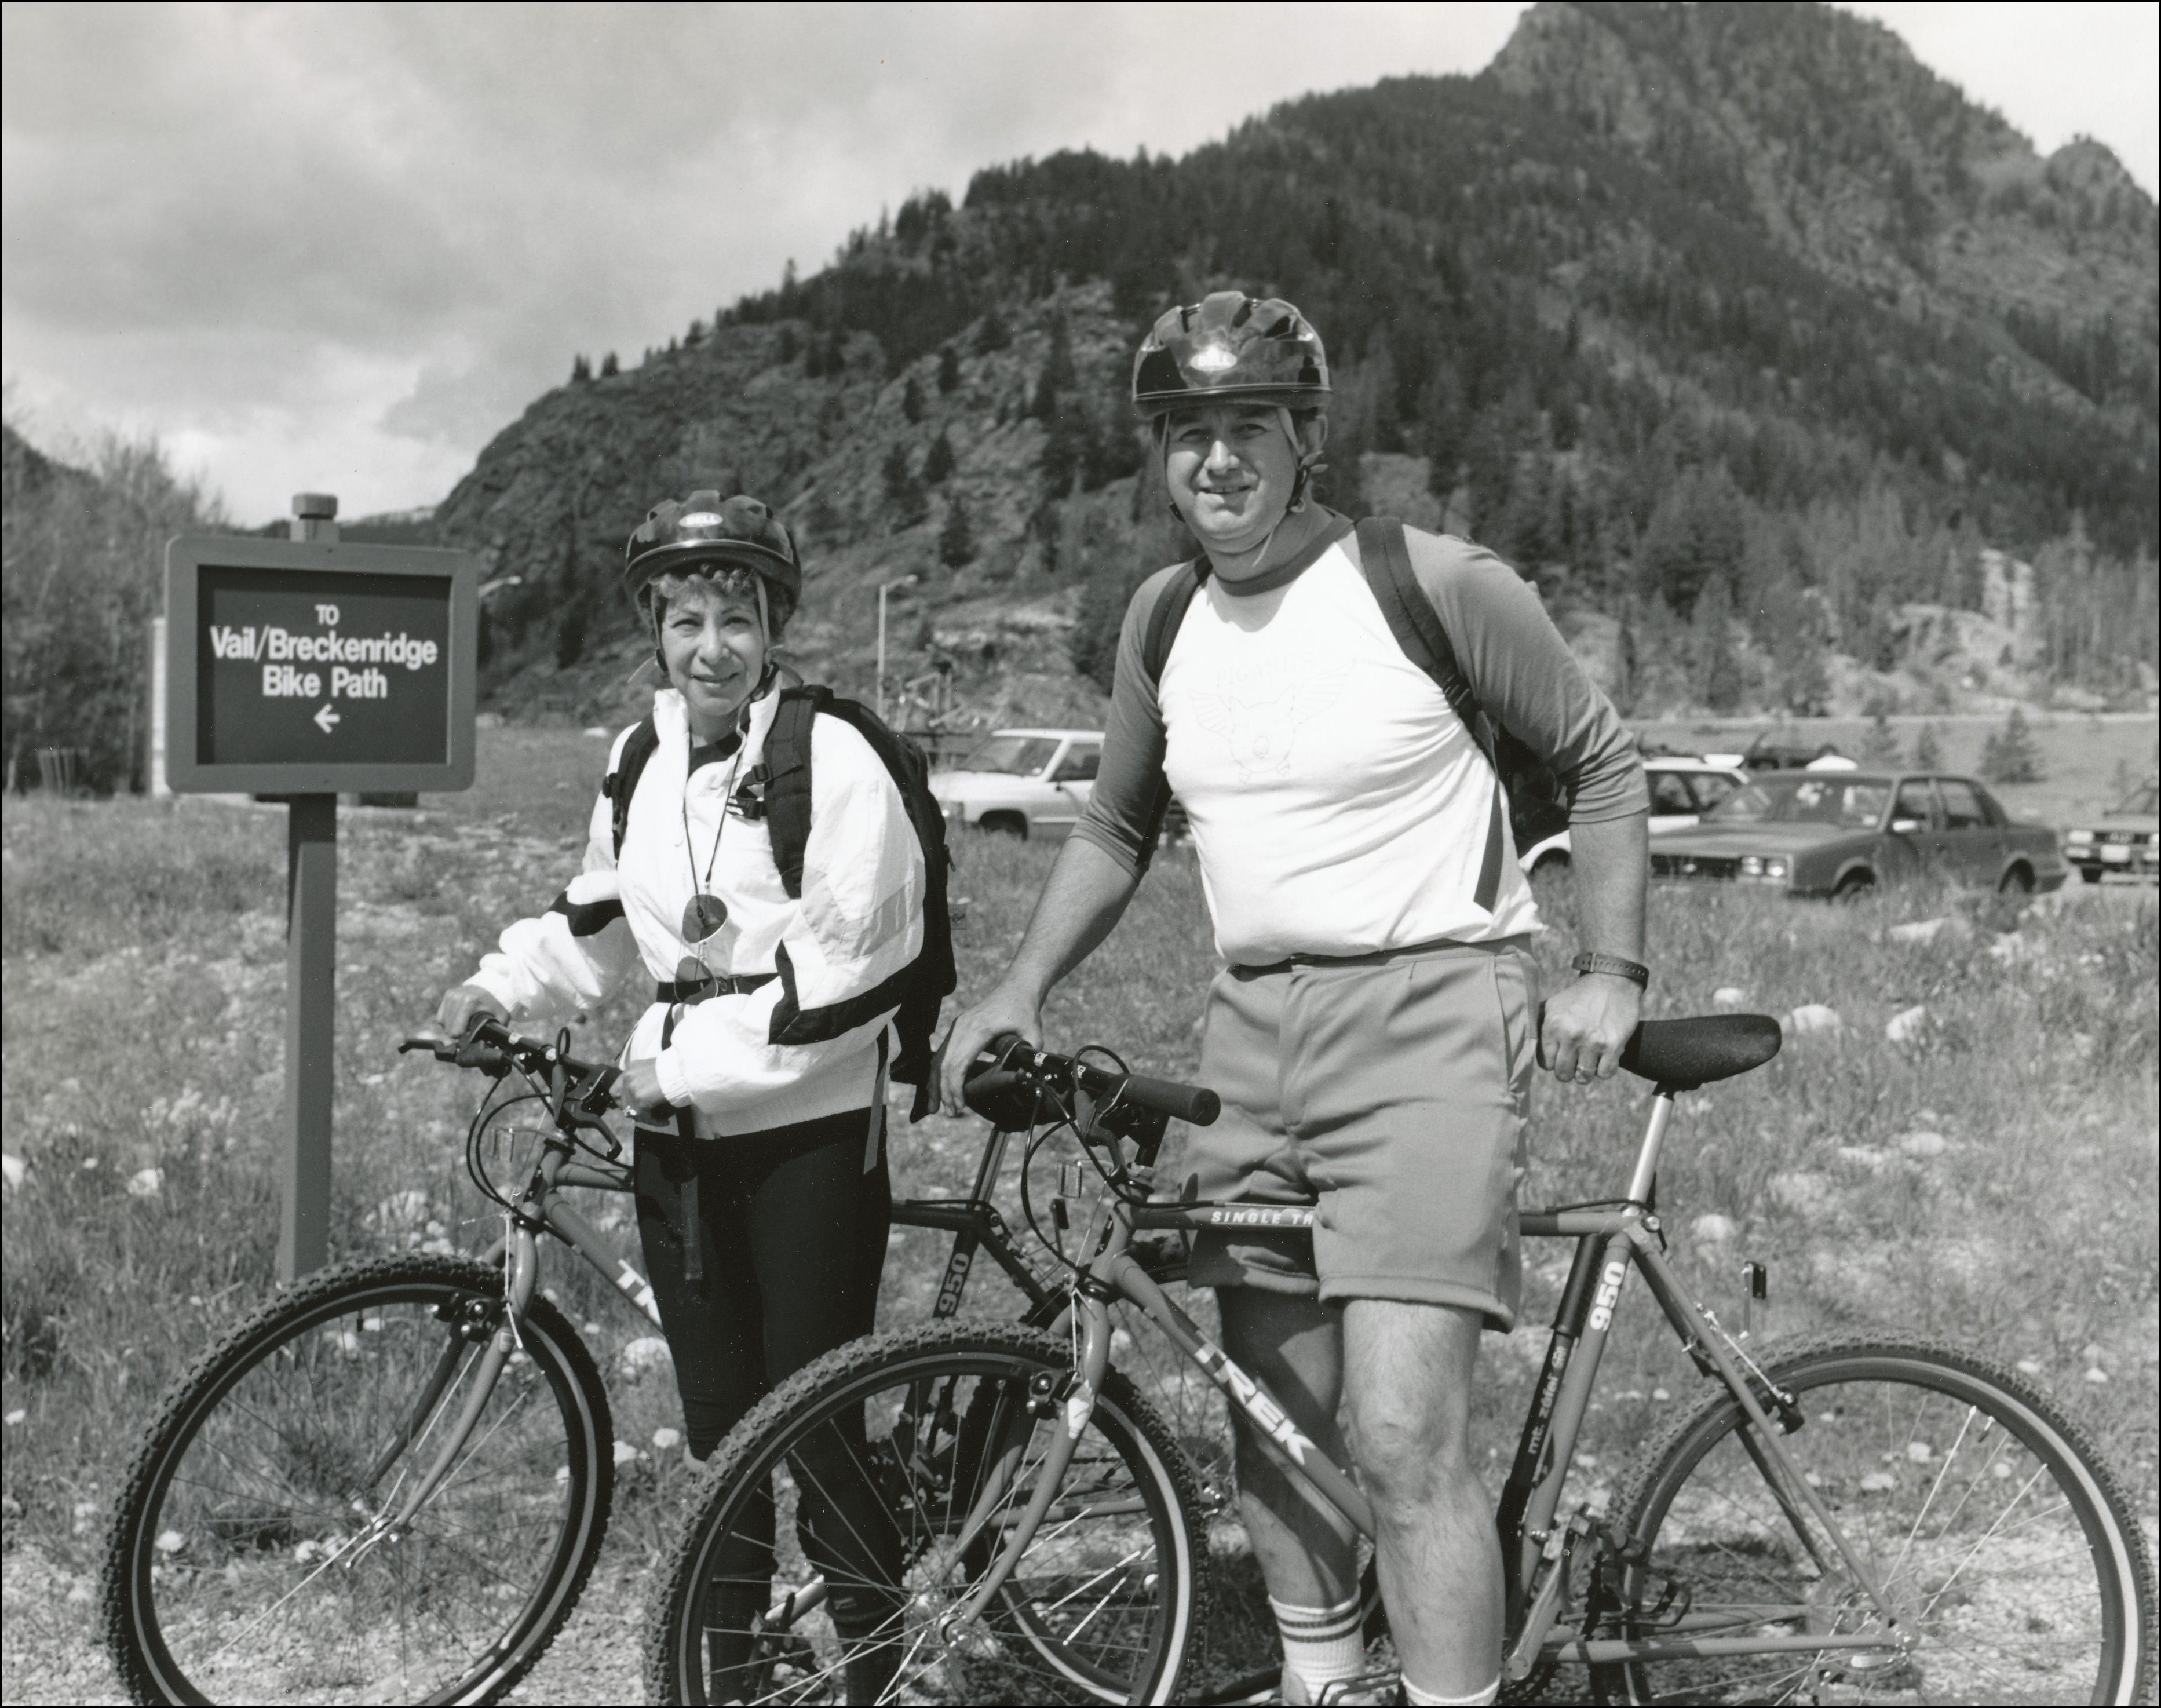 Two mountain bikers posing for the camera. Parking lot with cars behind them and sign to their left which says to Vail-Breckenridge Bike Path